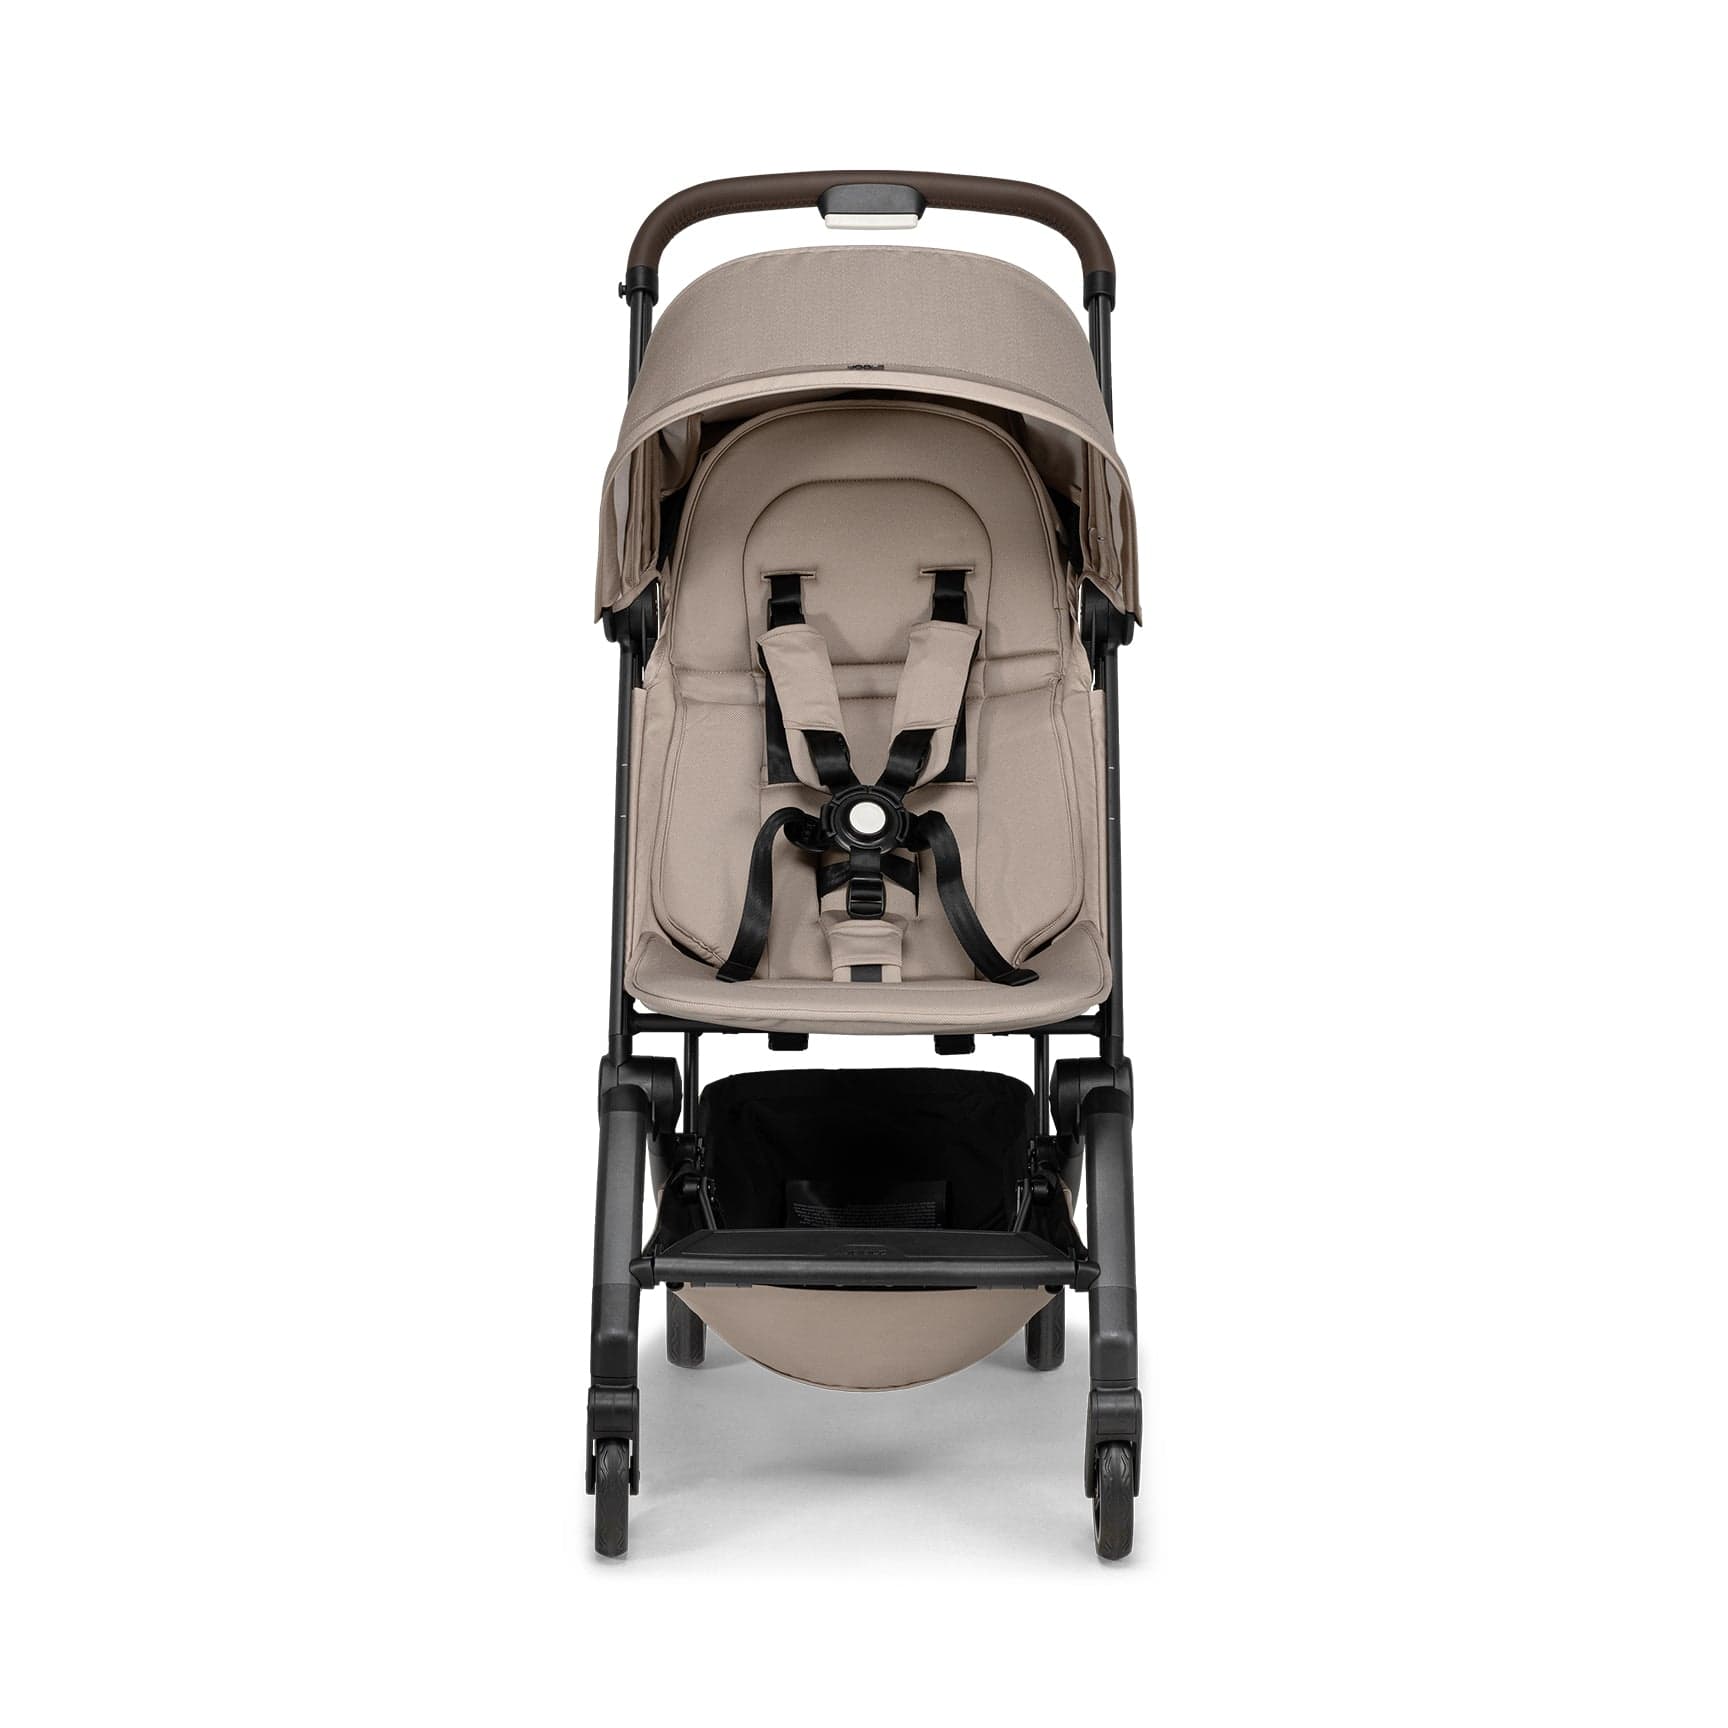 Joolz Aer+ Buggy Lovely Taupe Pushchairs & Buggies 310092 8715688075043